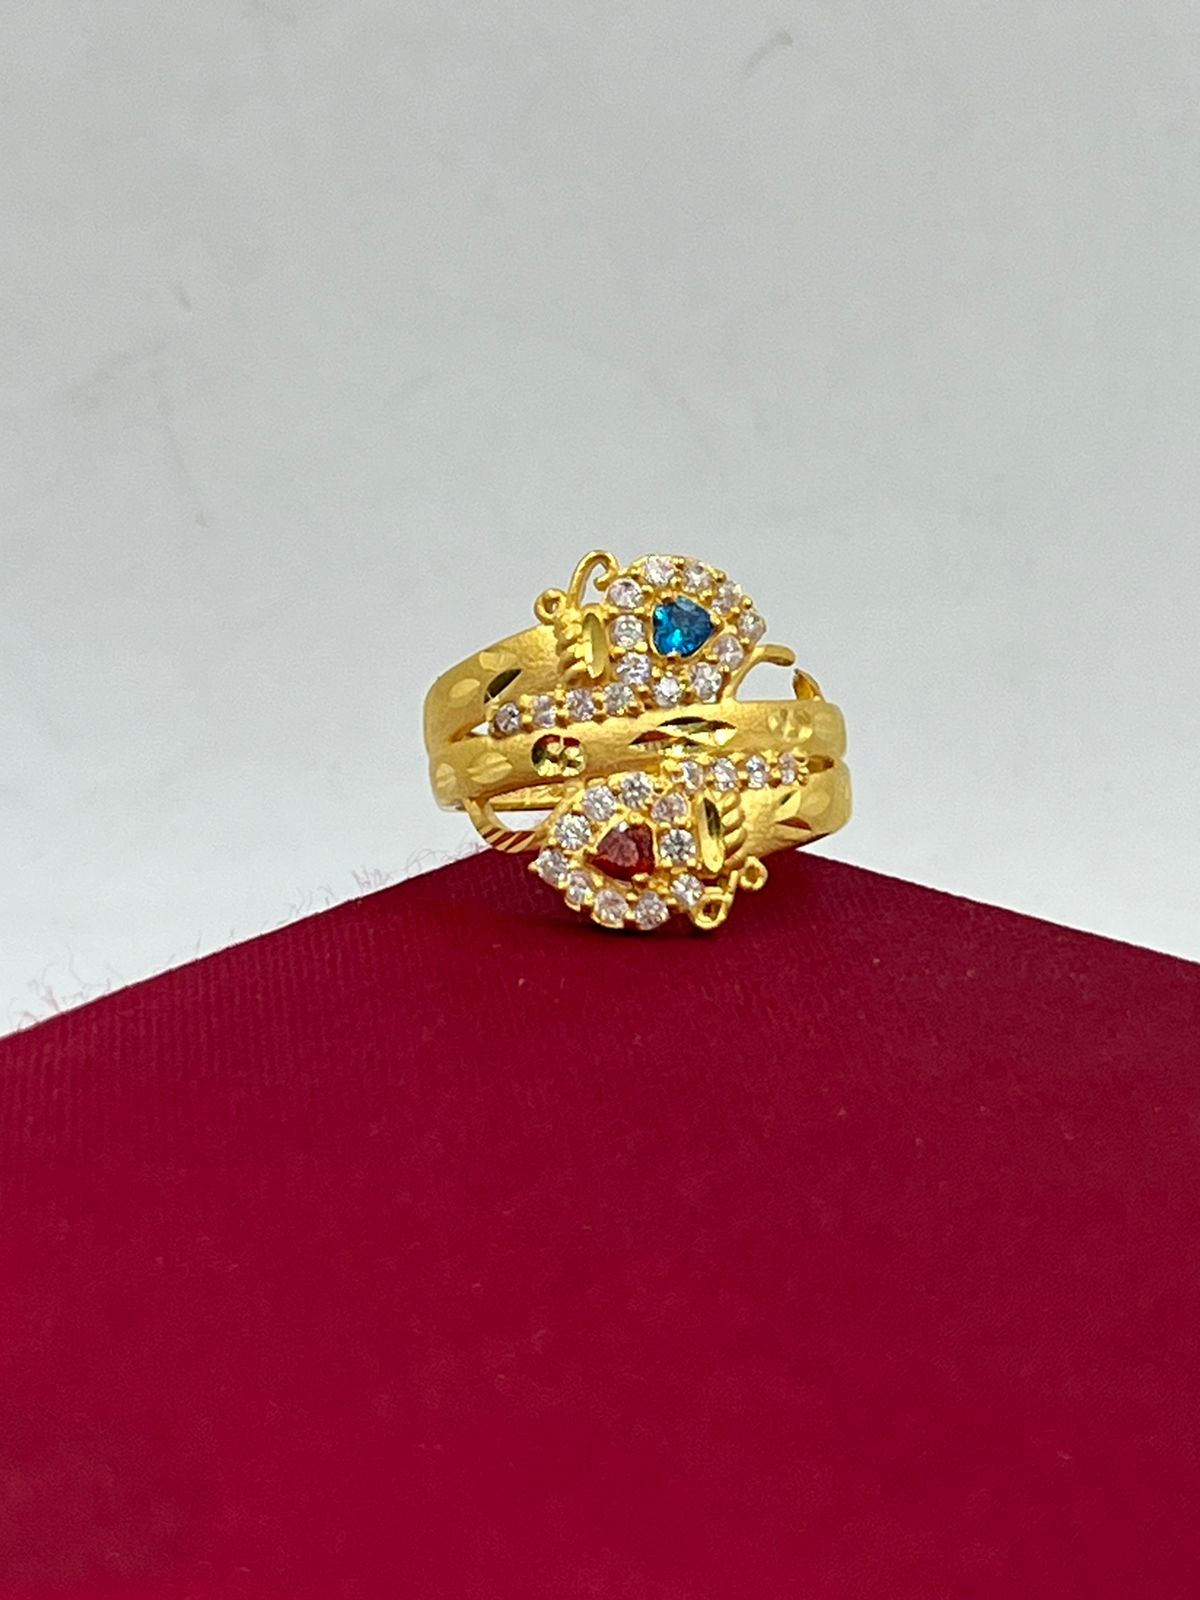 Buy quality cz Gold Ladies Ring in Ahmedabad